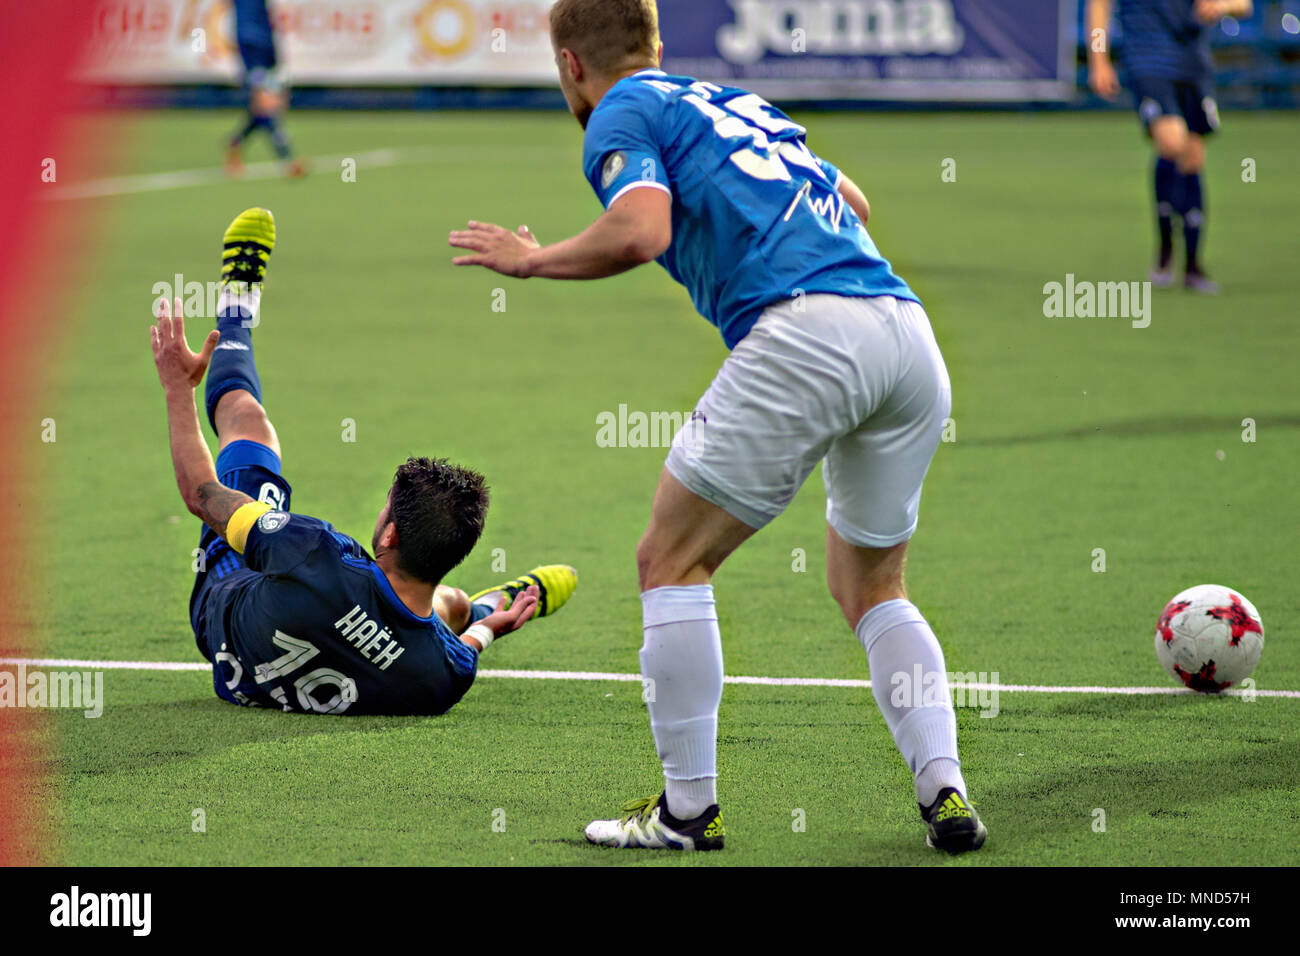 MINSK, BELARUS - MAY 14, 2018: Soccer players fights for ball during the Belarusian Premier League football match between FC Dynamo Minsk and FC Luch at the Olimpiyskiy stadium. Stock Photo